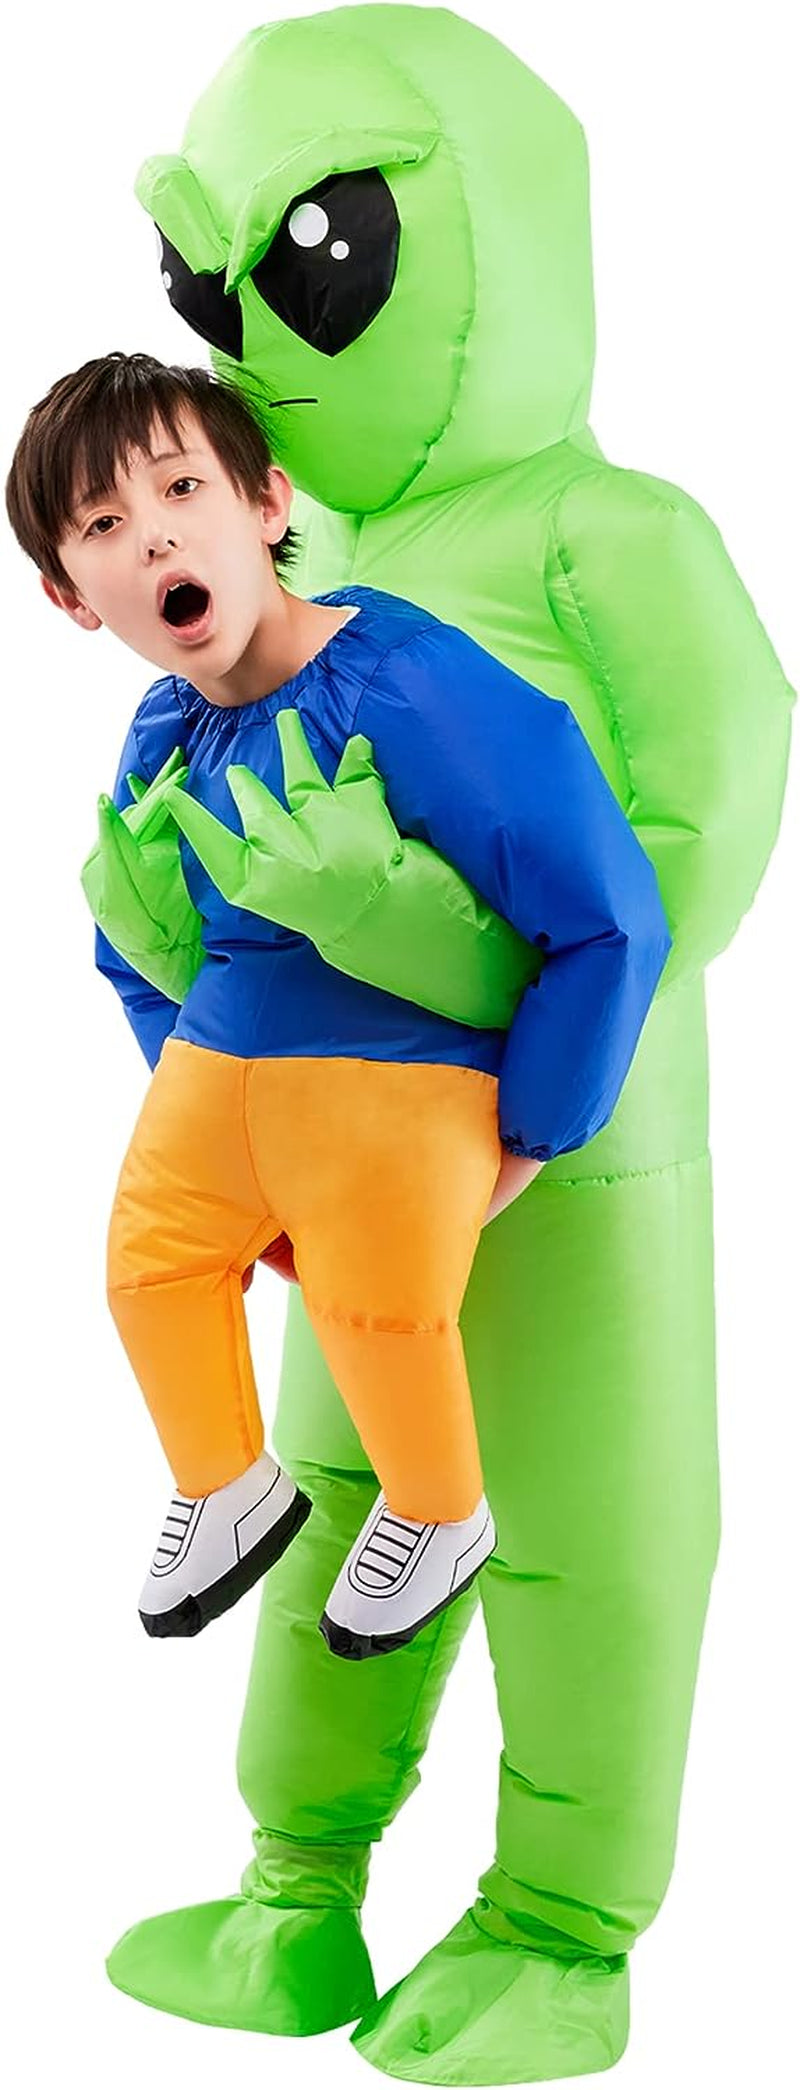 Spooktacular Creations Halloween Inflatable Alien Costume for Kids, Alien Full Body Inflatable Costume  Does Not Apply Premium  